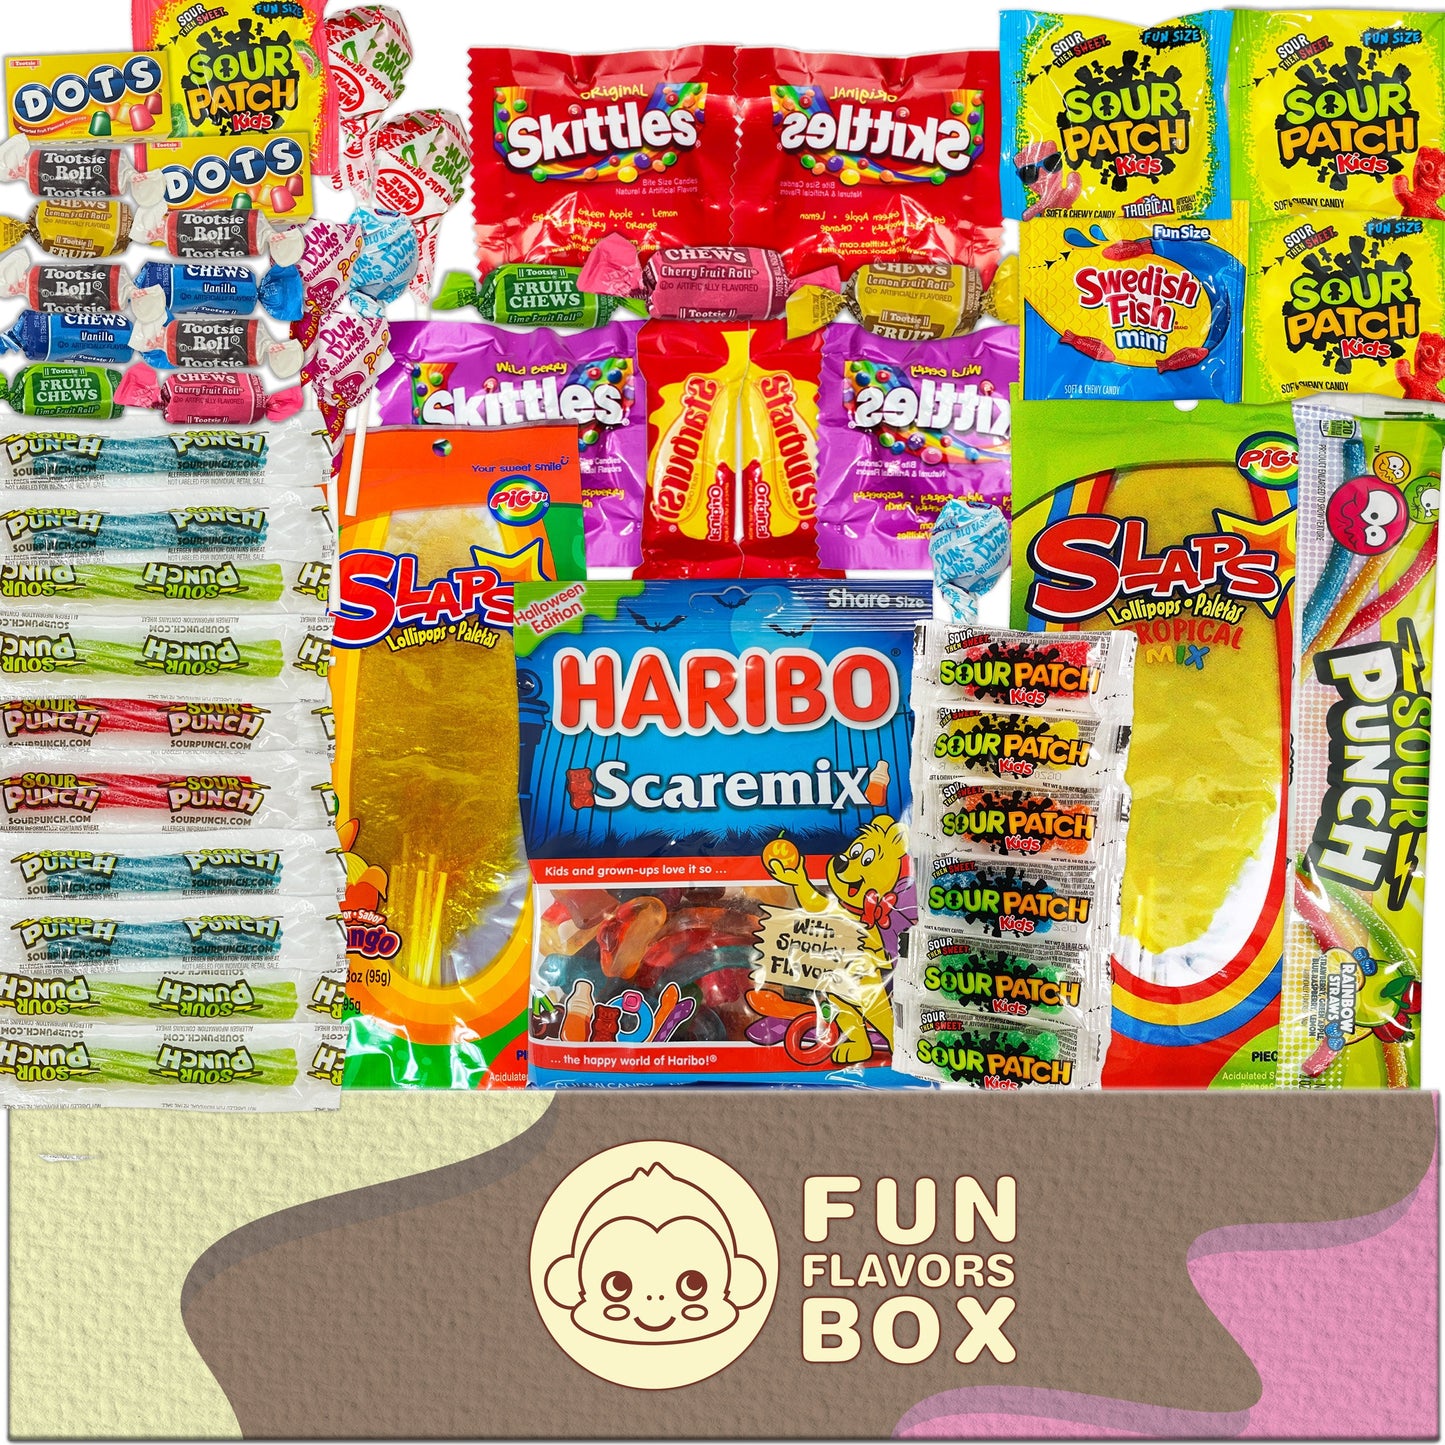 Kids Candy Box (50 Count) Snack Box Variety Treat Box. College Care Package